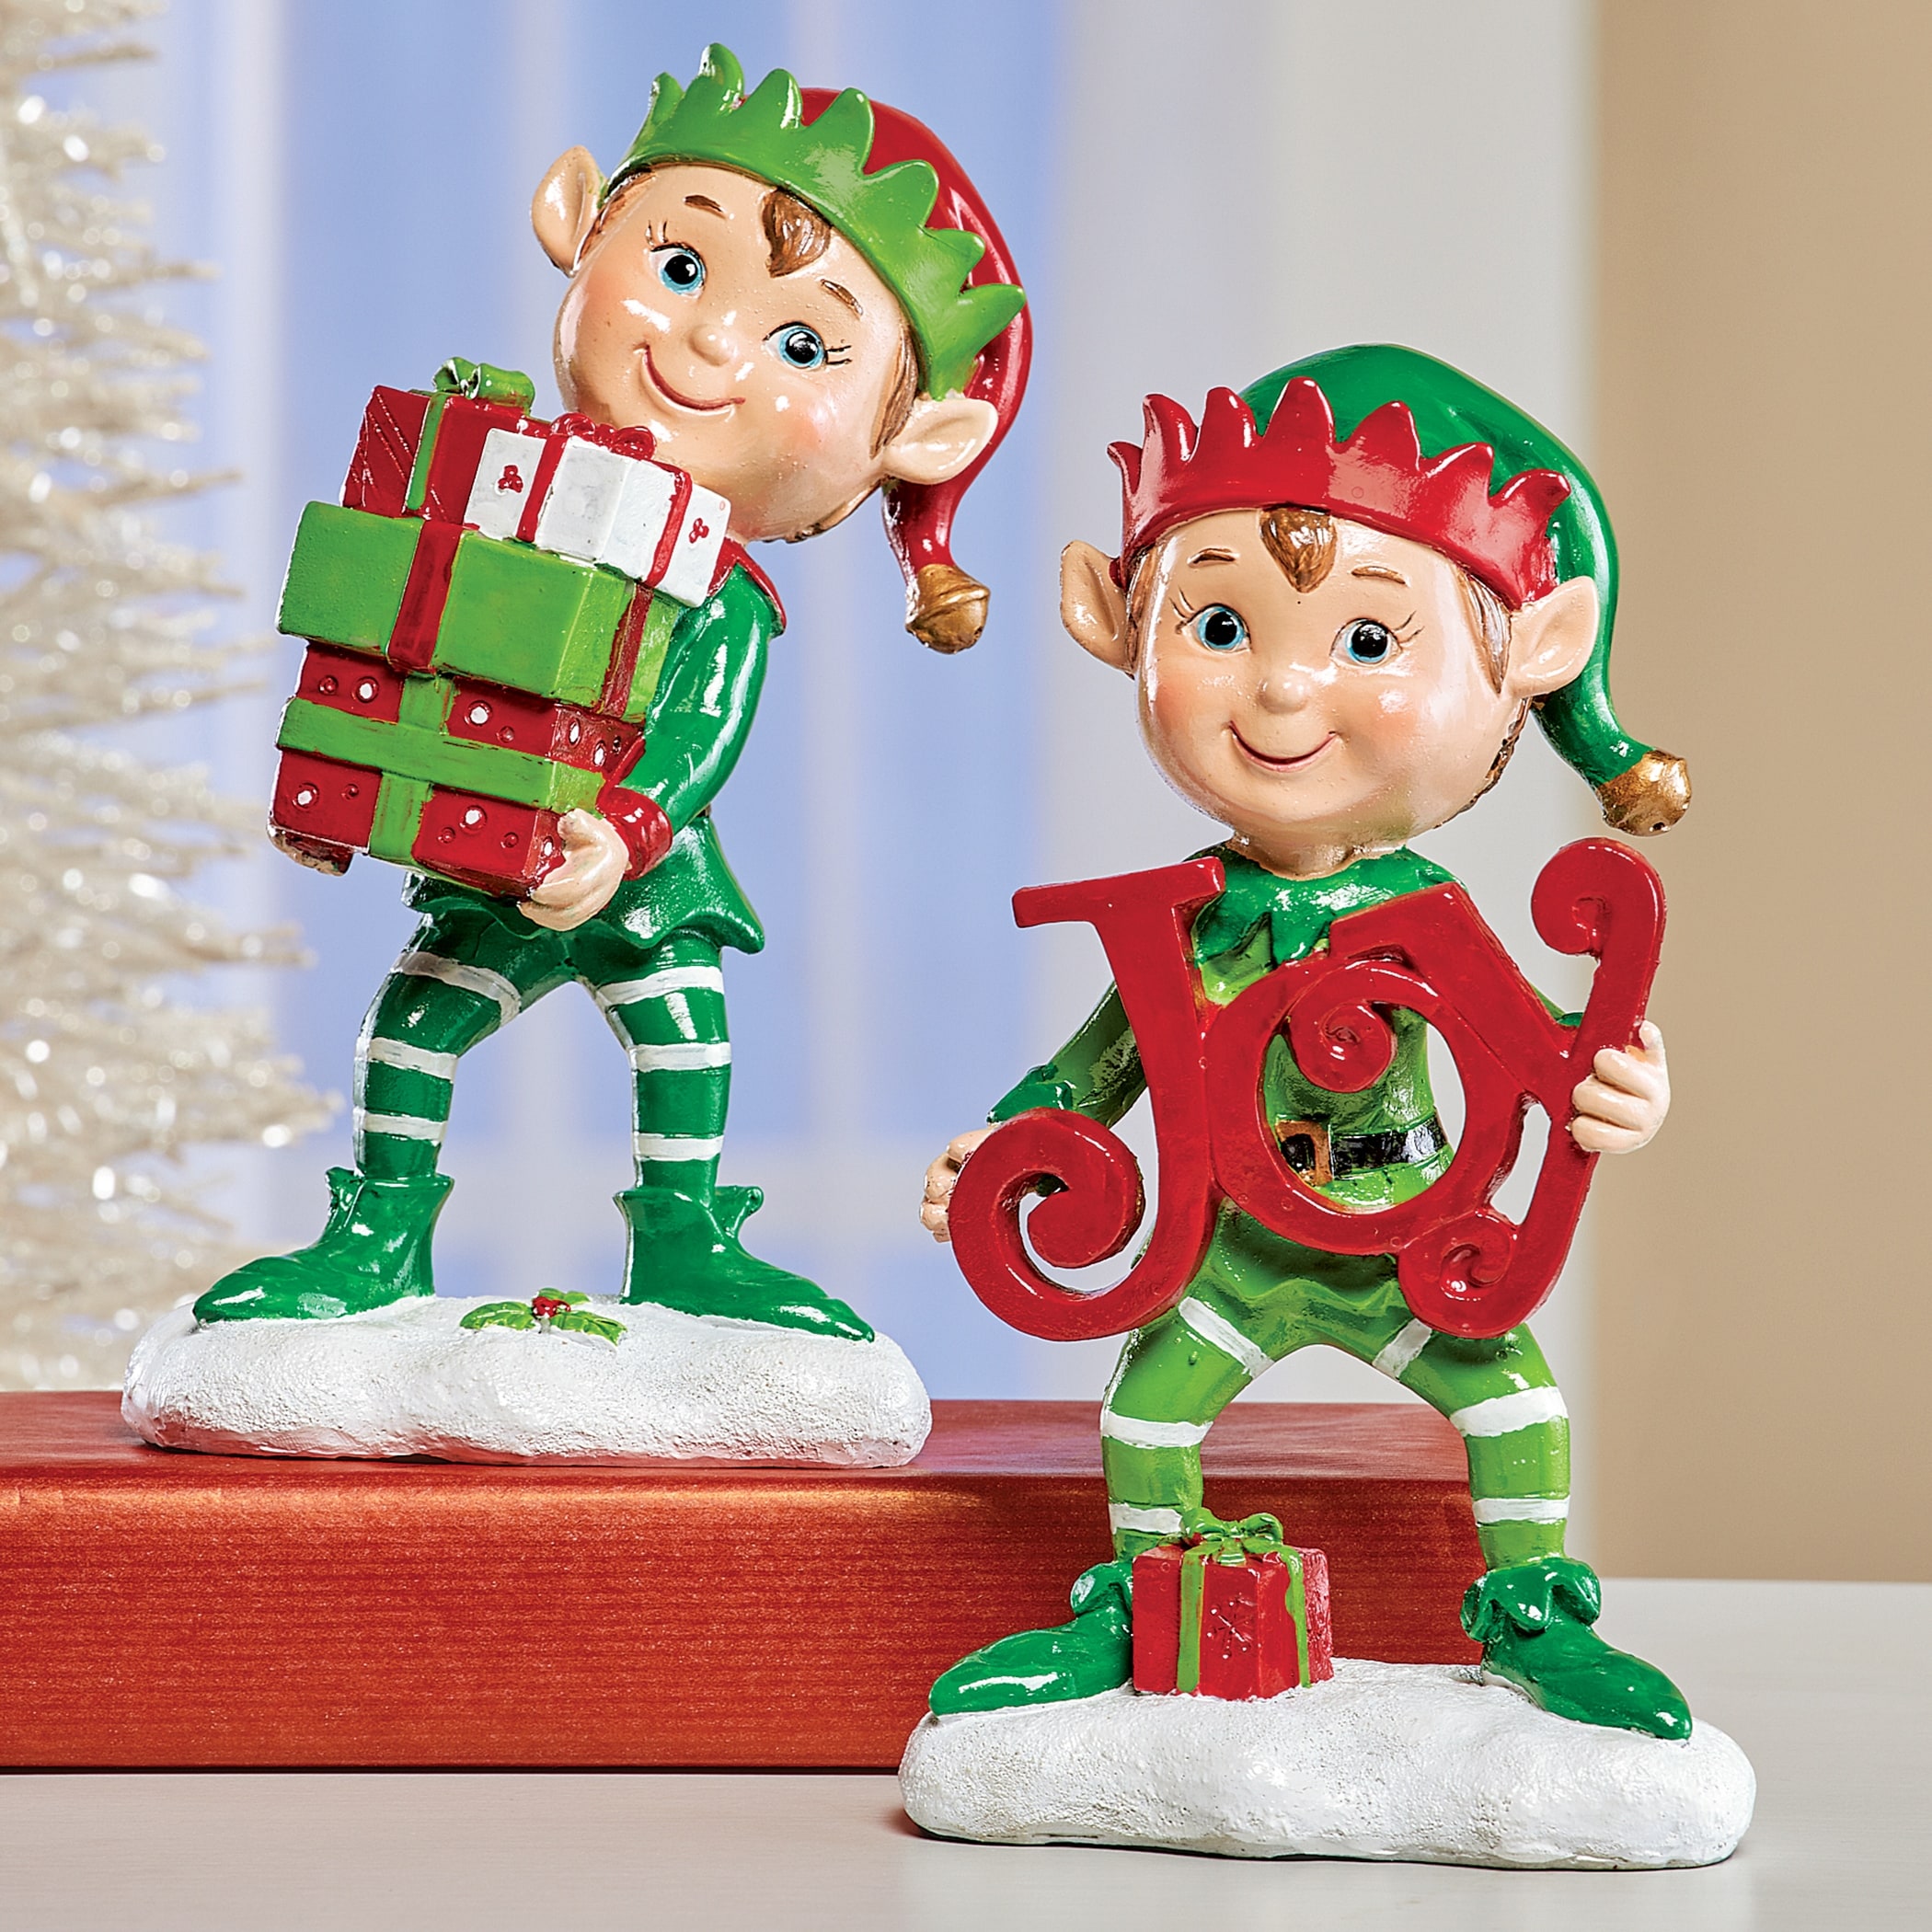 Set of 2 Holiday Elves Christmas Tabletop Figurines - 11.130 x 9.250 x 5.630